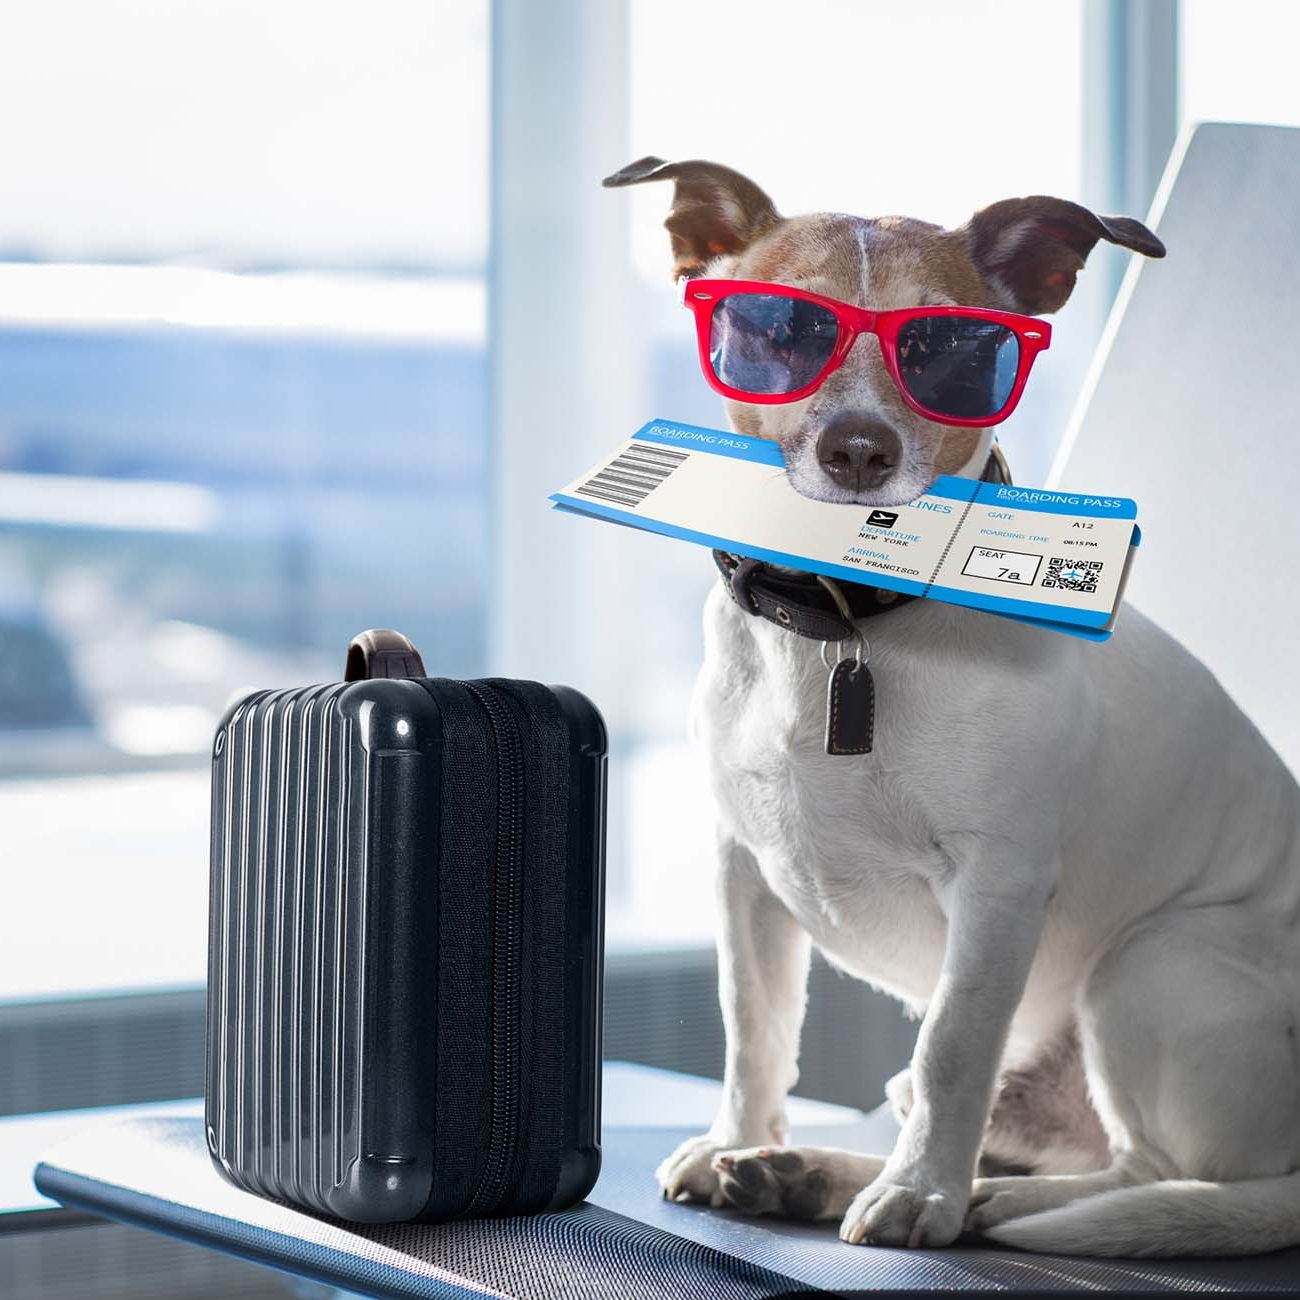 Holiday vacation jack russell dog waiting in airport terminal ready to board the airplane or plane at the gate, luggage or bag to the side